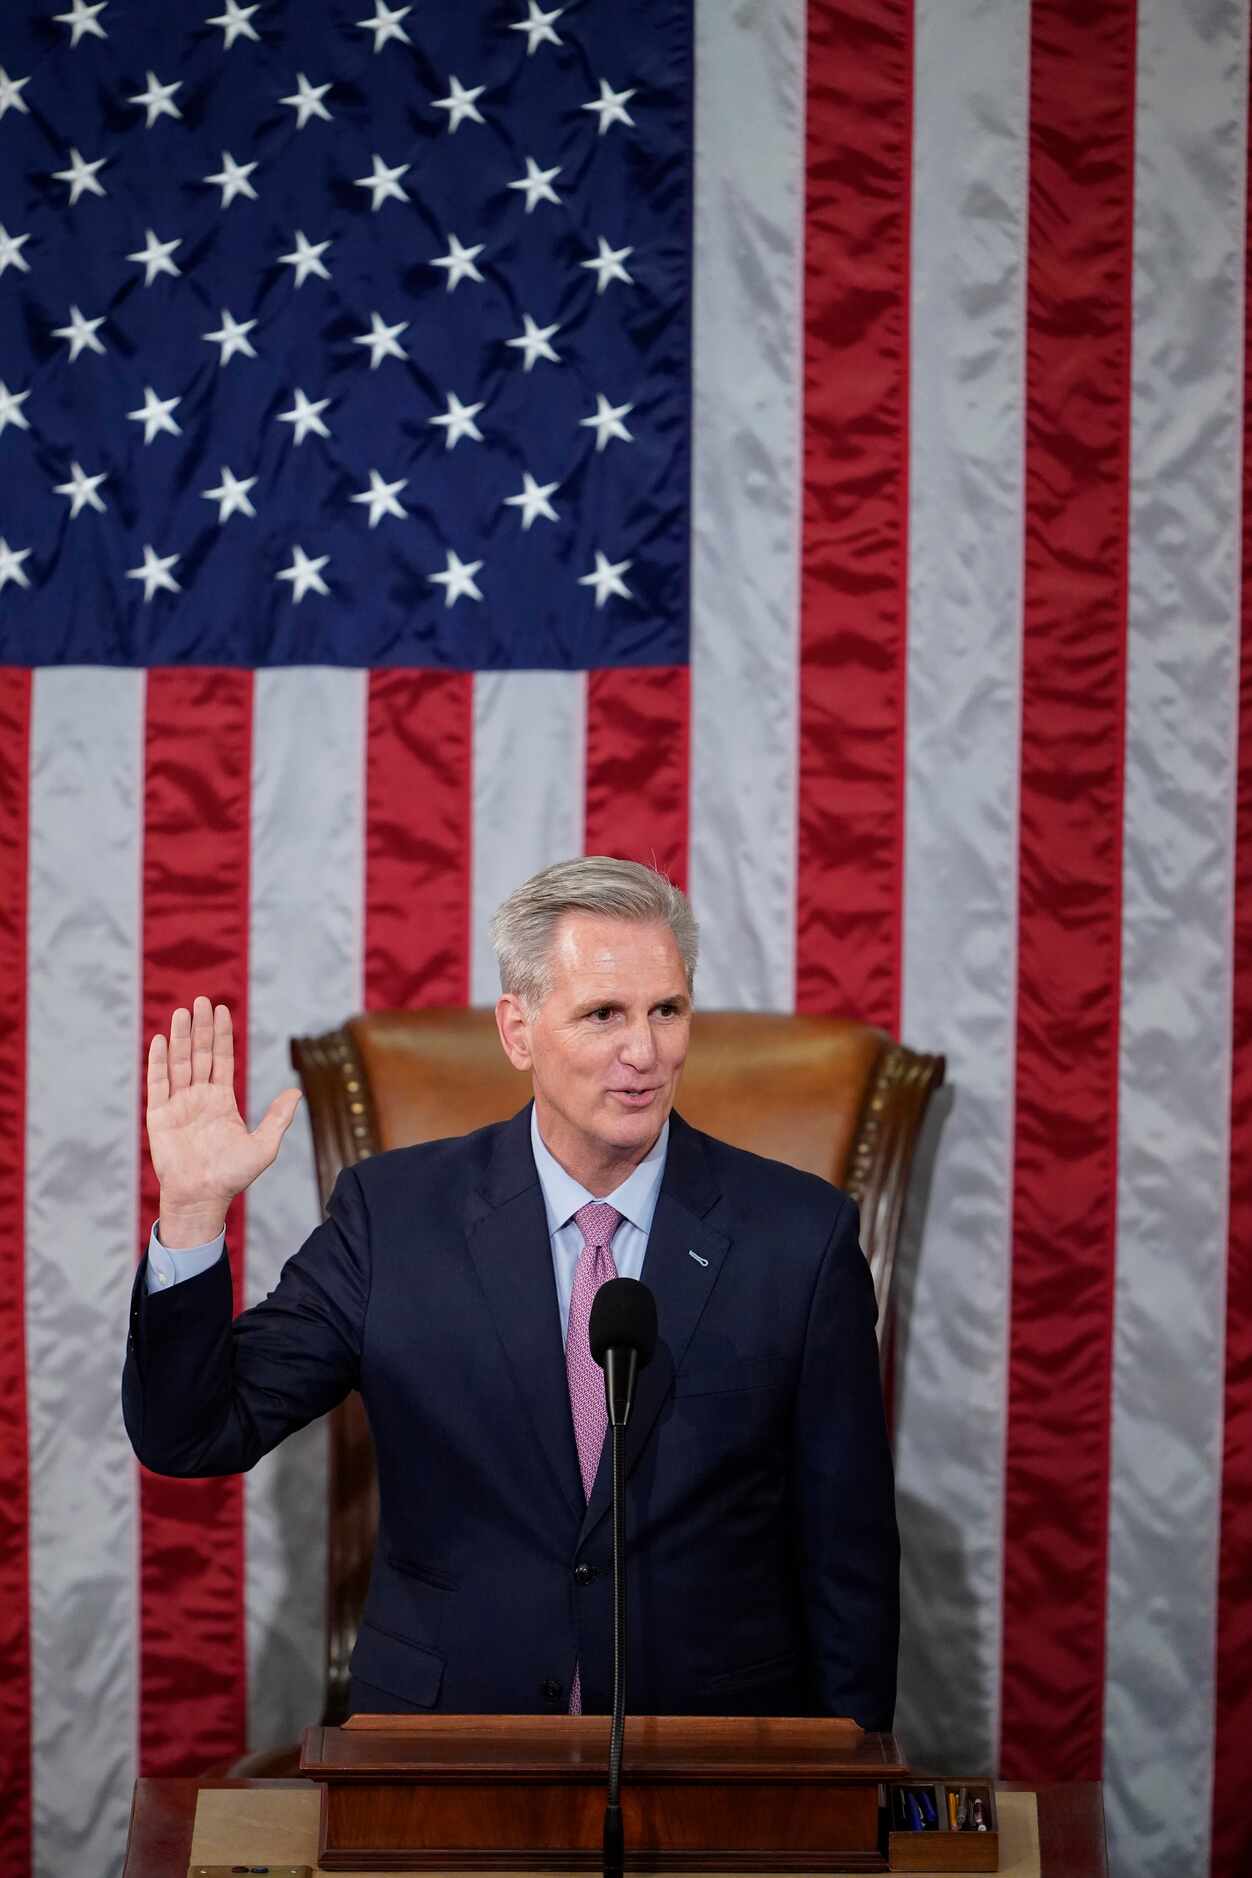 Dean of the House Rep. Hal Rogers, R-Ky., swears in Rep. Kevin McCarthy, R-Calif., as House...